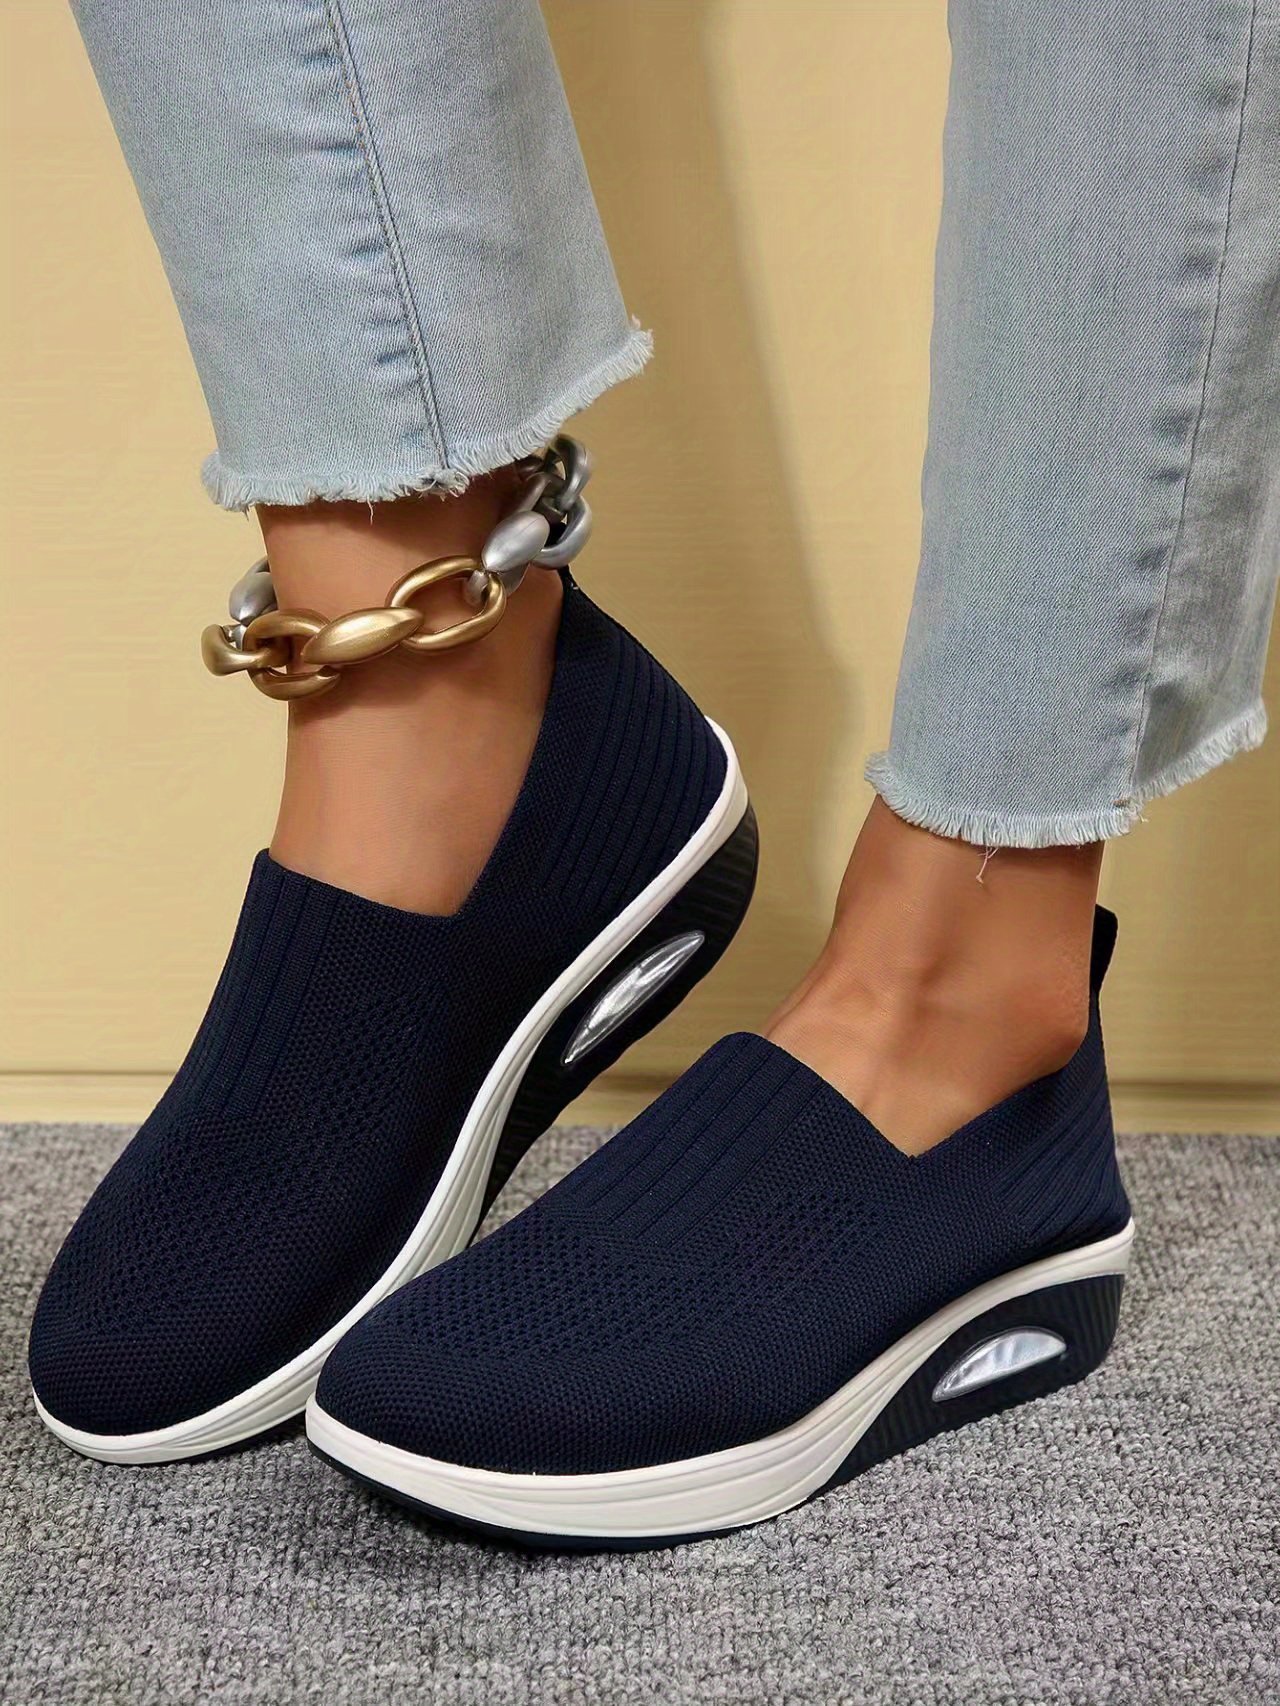 womens air cushion sock shoes comfort knitted slip on platform shoes casual walking shoes details 0